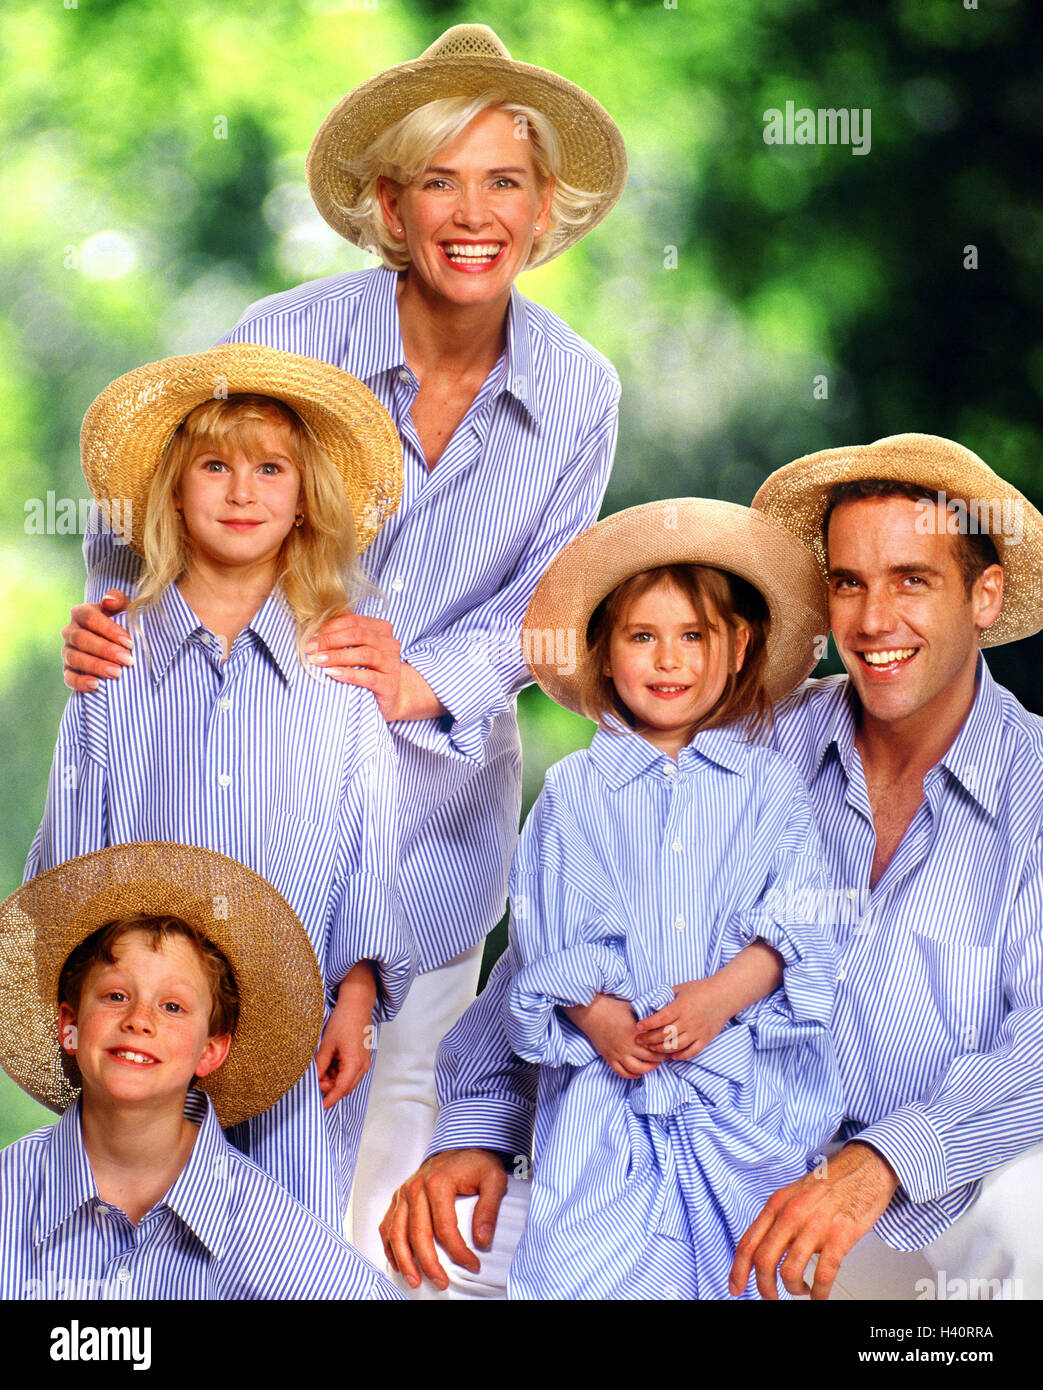 Family, clothes, 'partner's look', straw hats, shirts, white-blue, touched, group picture Families, man, woman, parents, children, boy, son, gesture, pollex, high, girls, subsidiary, subsidiaries, two, unit clothes, care, hats, shirt, shirts, films, stand, laugh, Stock Photo